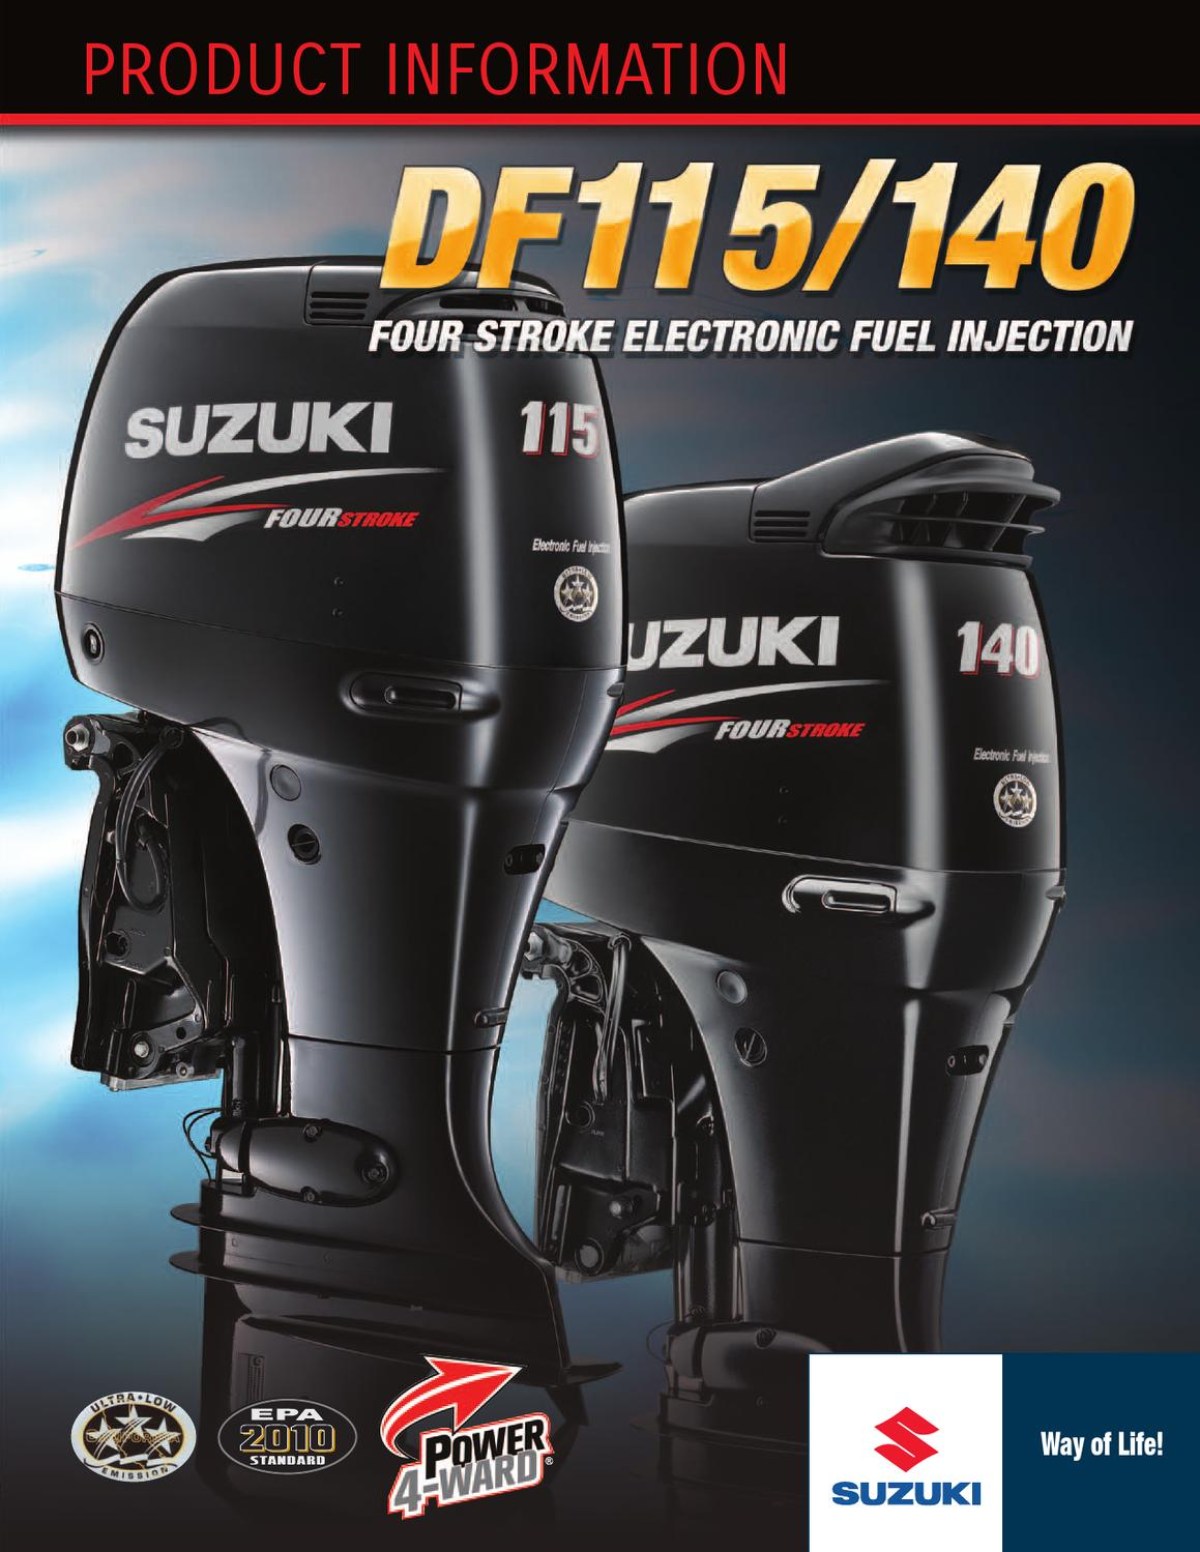 Picture of: Suzuki Outboards – by GARZON STUDIO – Issuu